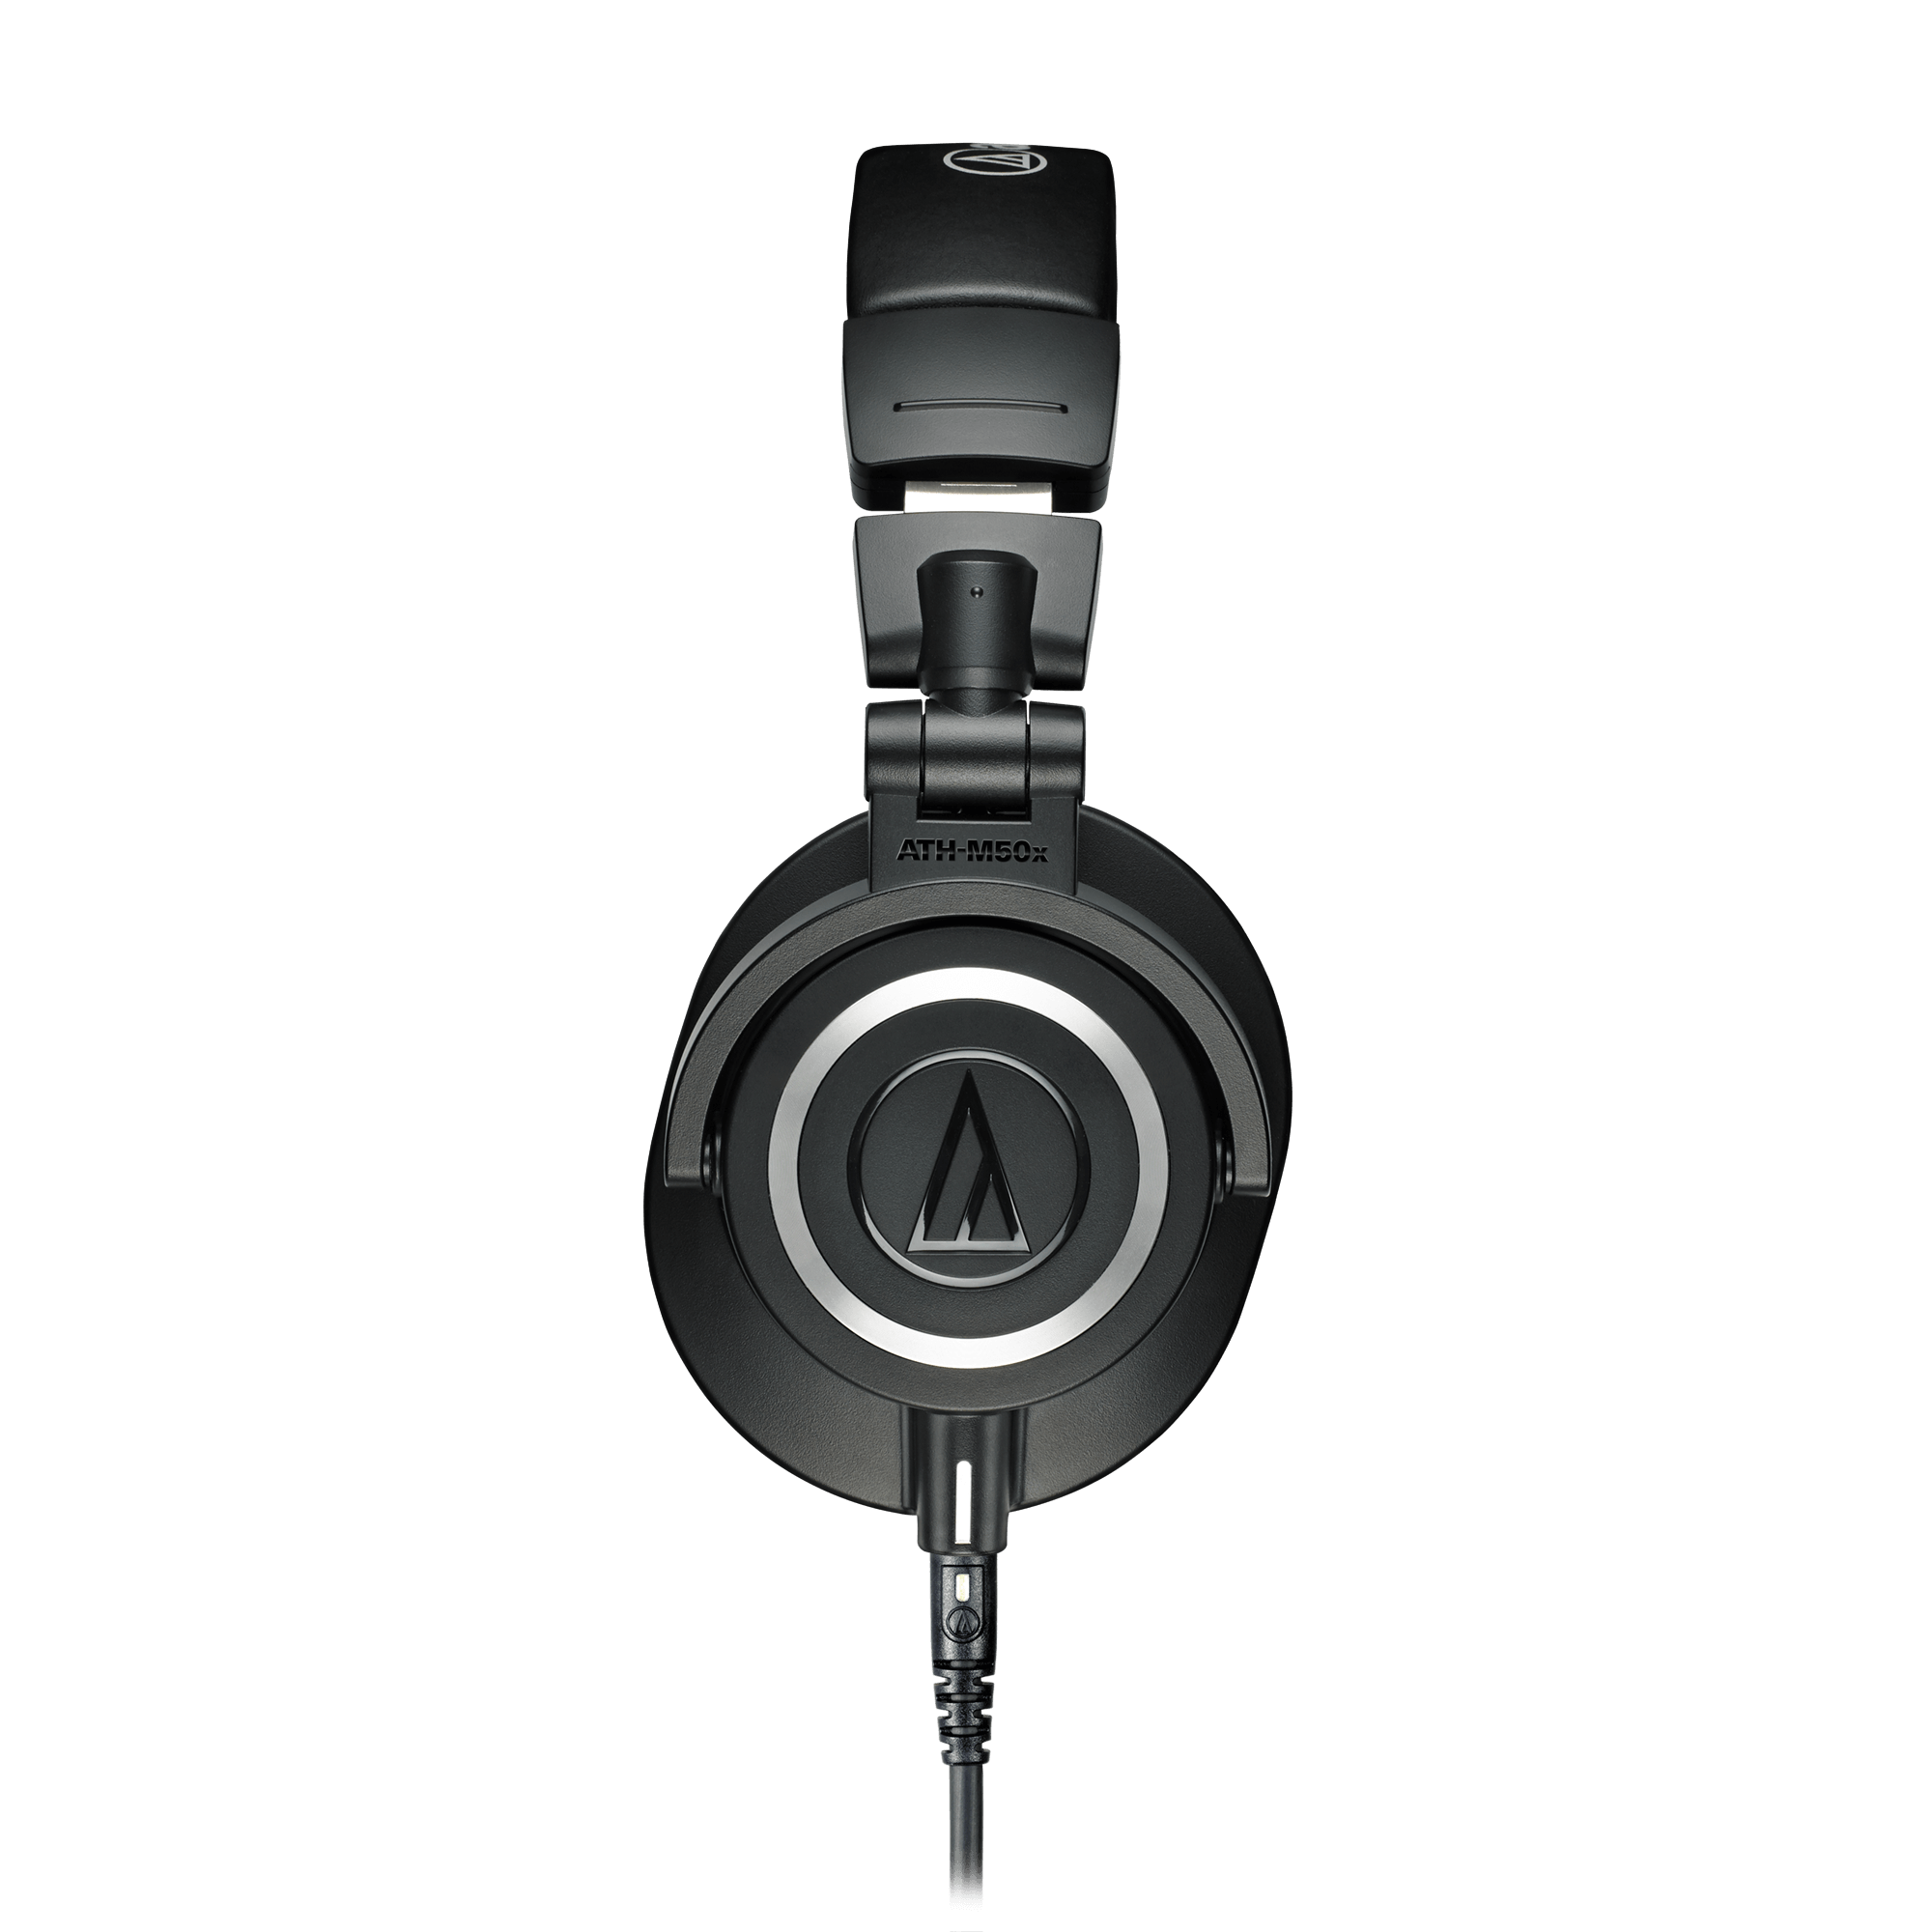  Audio-Technica ATH-M50x Professional Studio Monitor Headphones  with in line mic : Musical Instruments